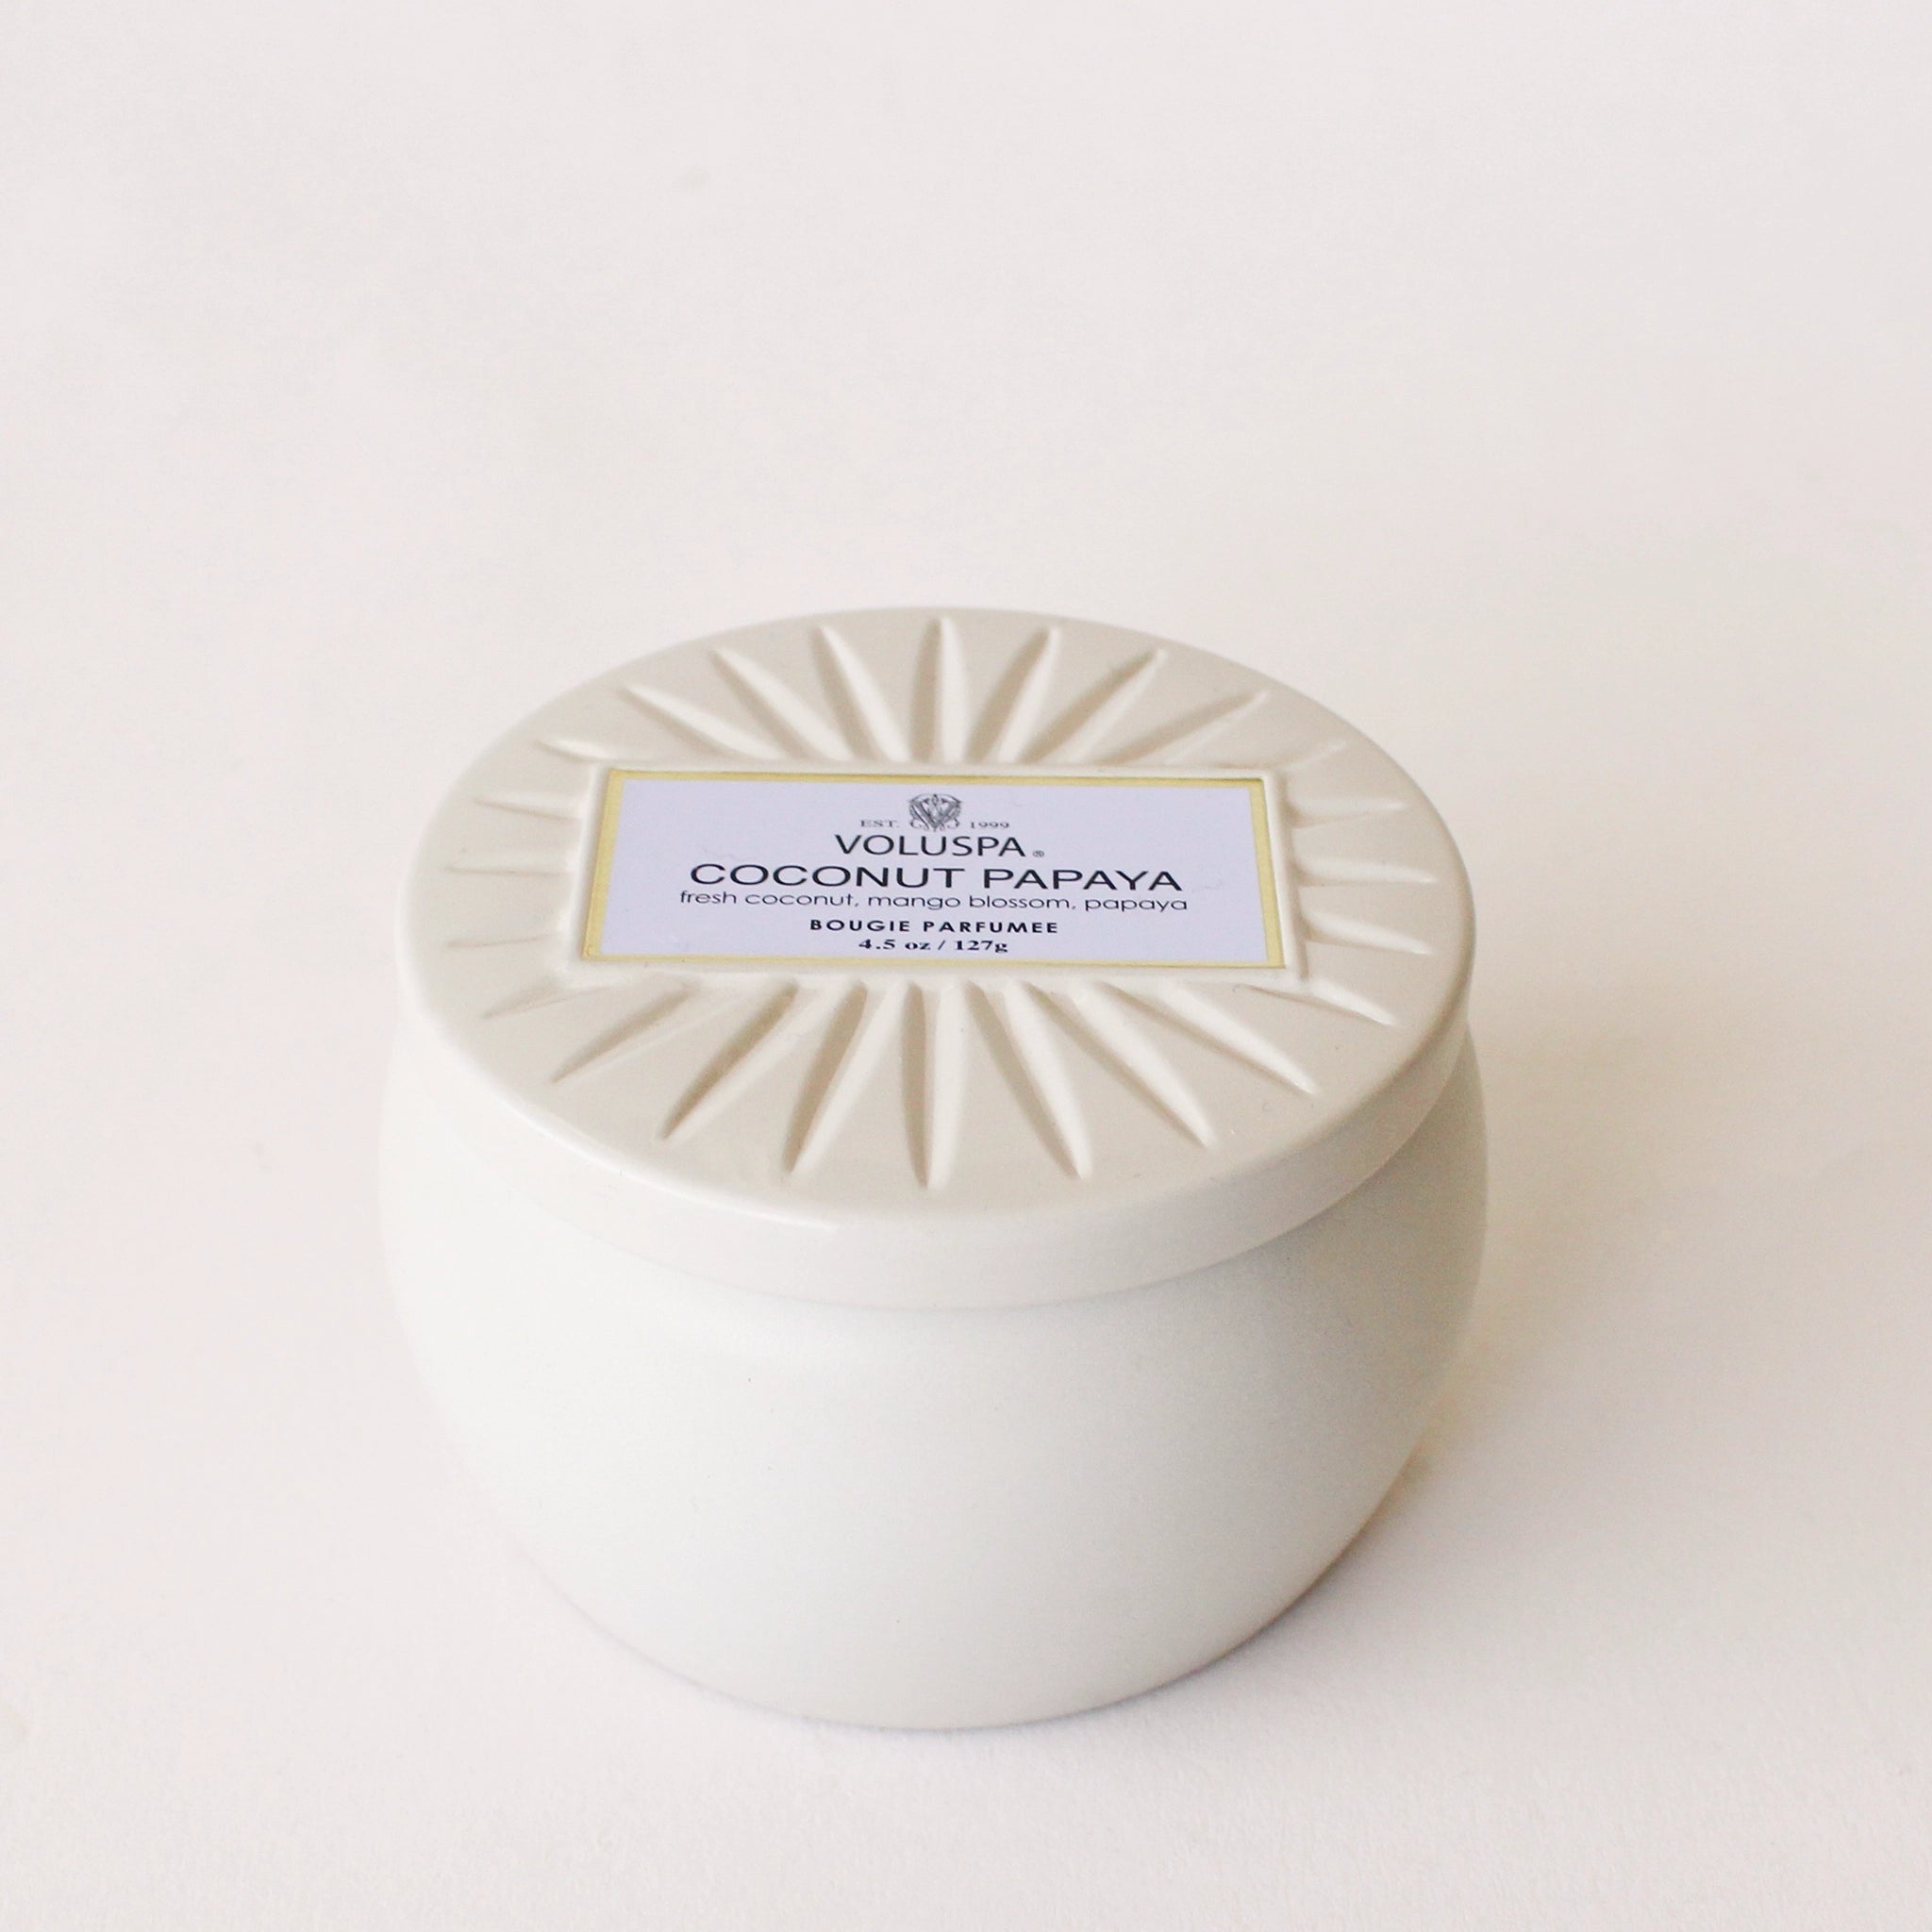 On a cream background is a round tin candle with a lid and a single wick candle inside and a label that reads, "Voluspa Coconut Papaya".